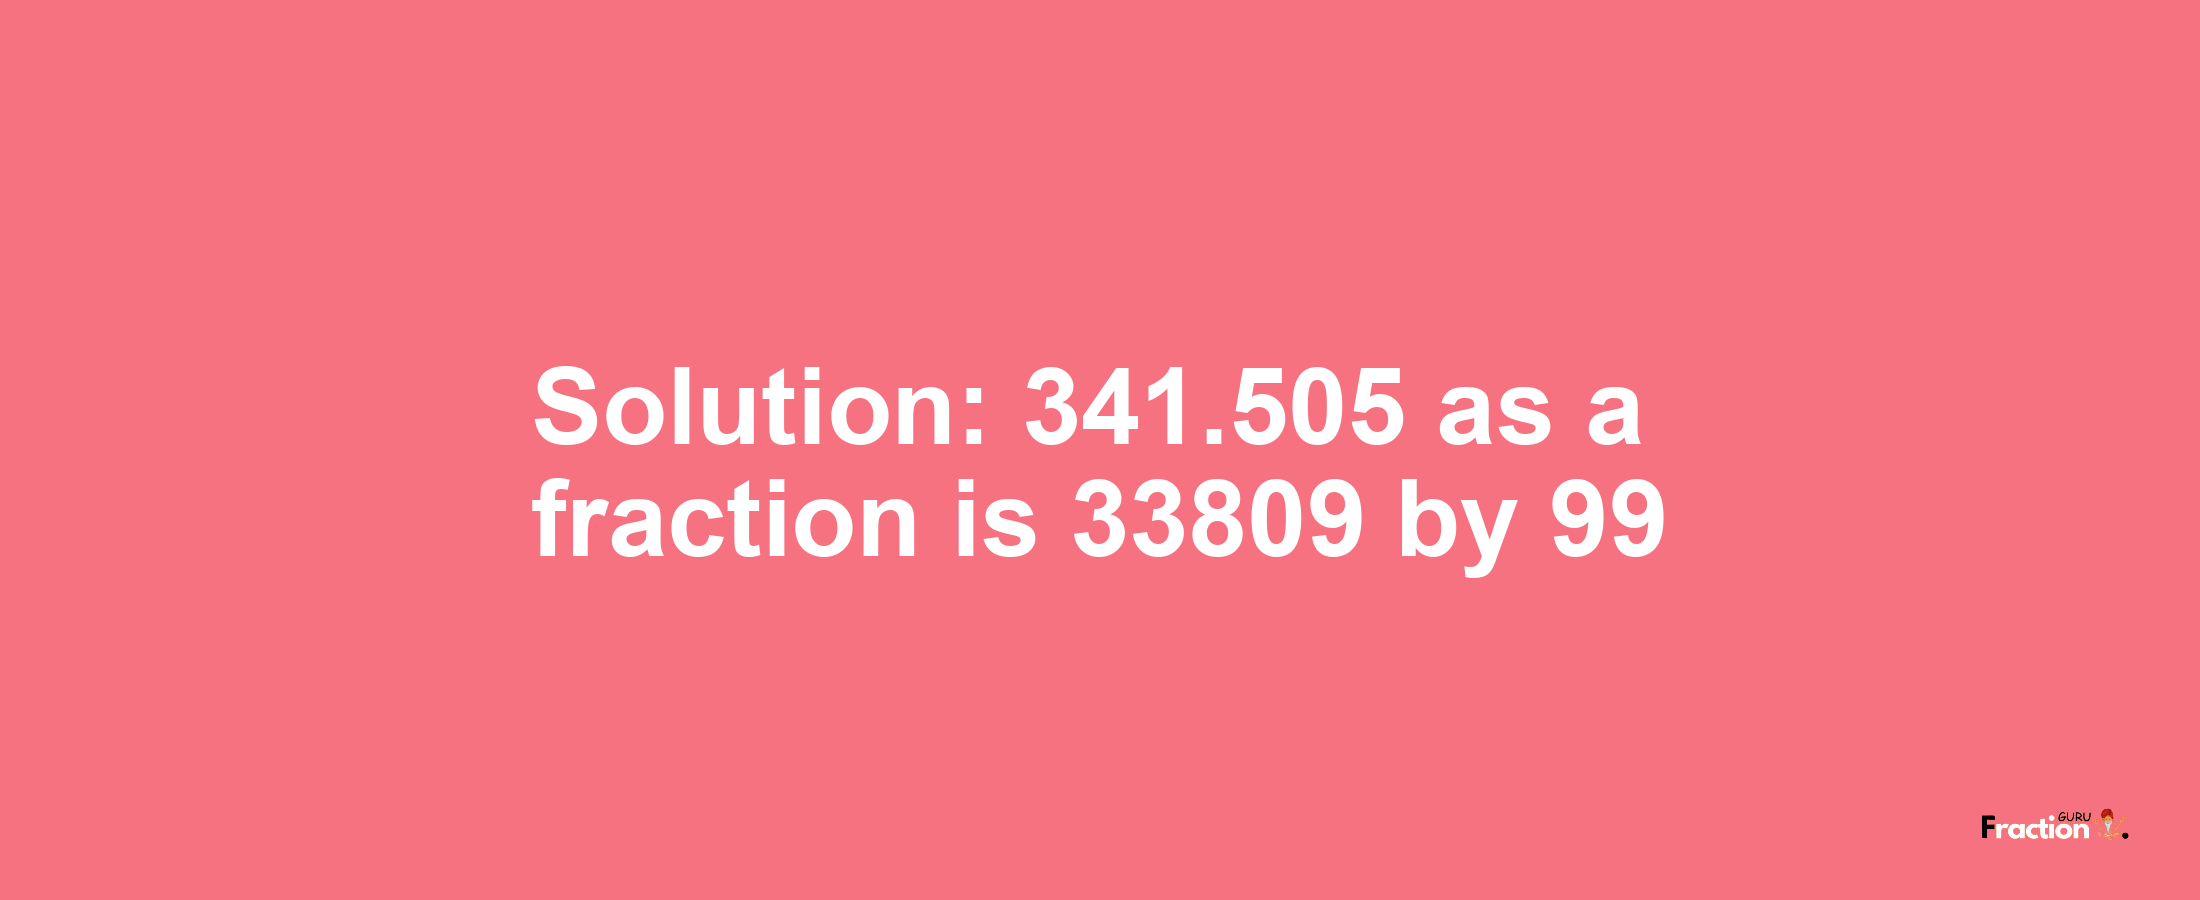 Solution:341.505 as a fraction is 33809/99